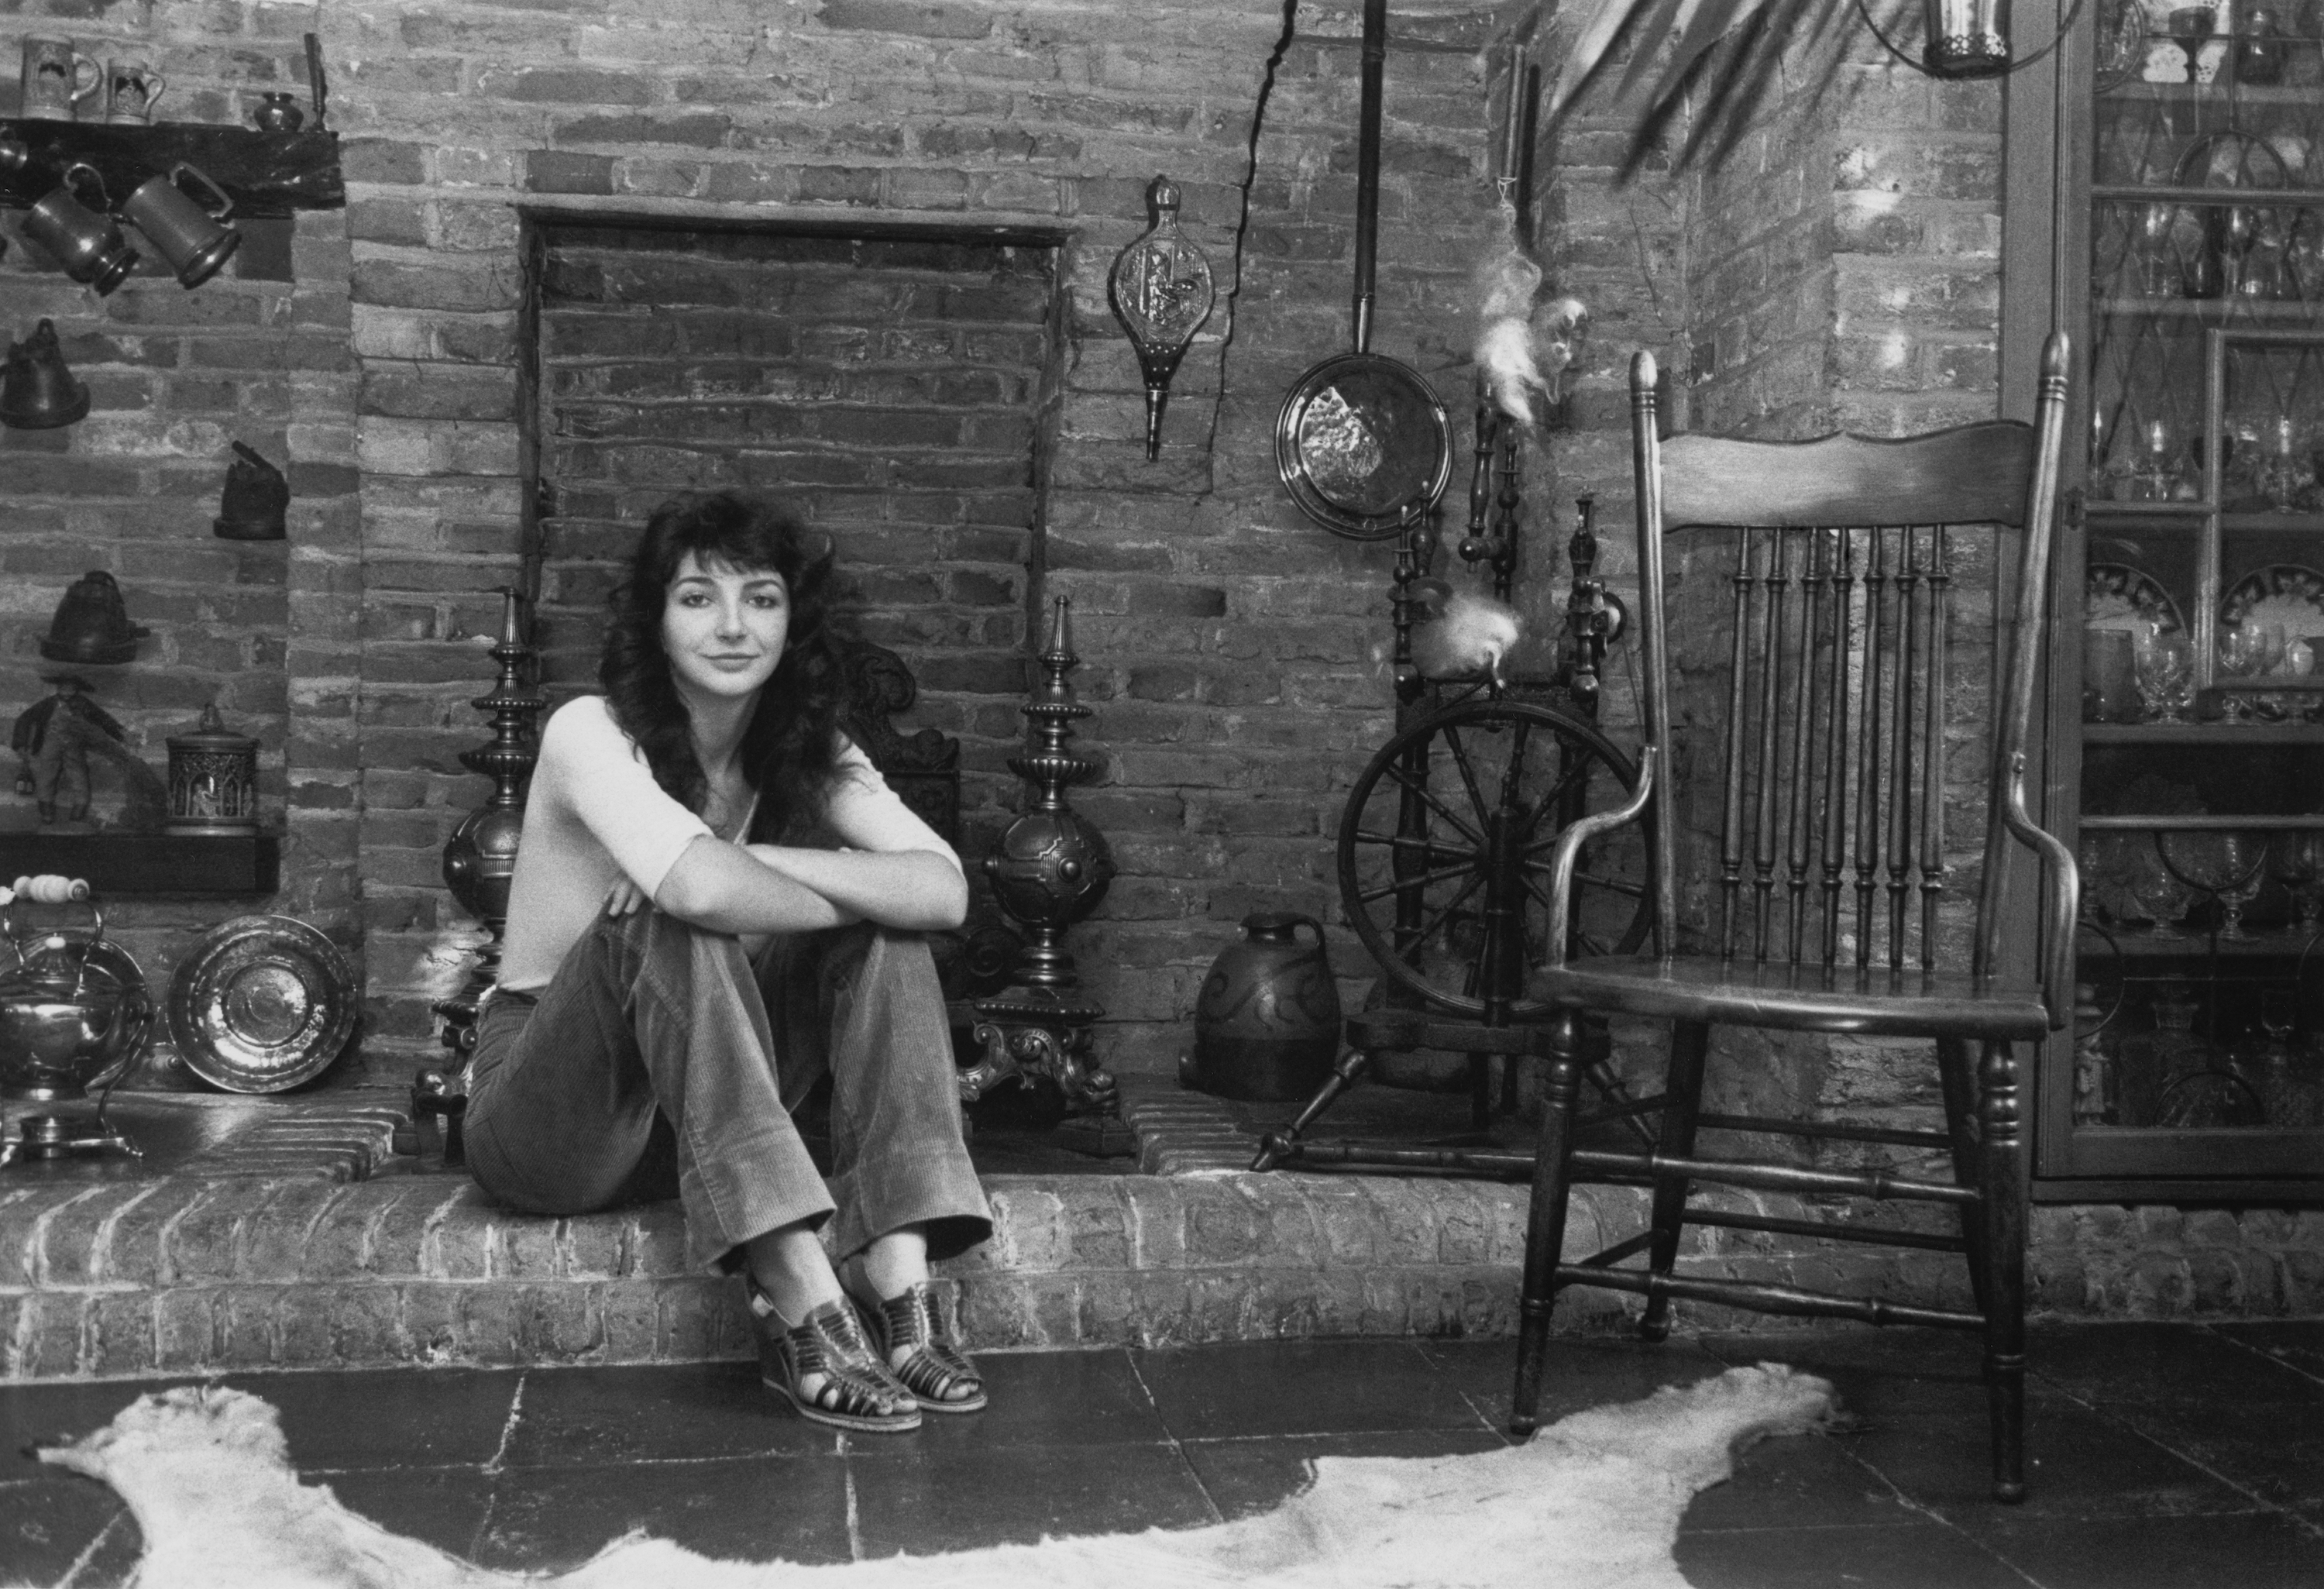 Kate Bush sitting on a fireplace at her family home in 1978, surrounded by pots, jugs, a spinning wheel, wooden chair and bear rug while wearing jeans, a white fitted crop top and wedged sandals.